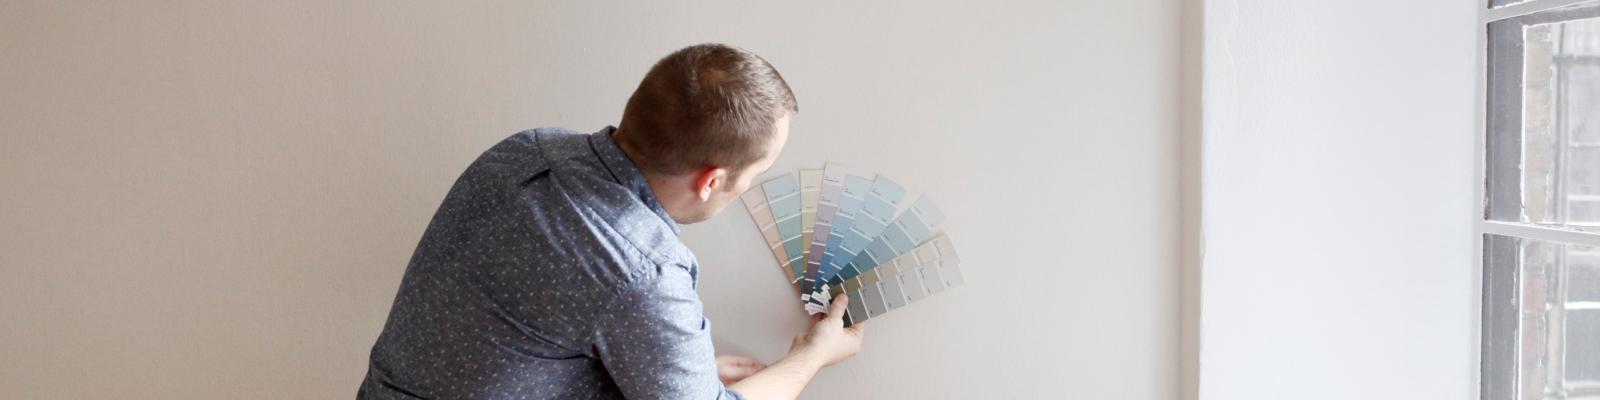 A man looking at paint samples on a wall.